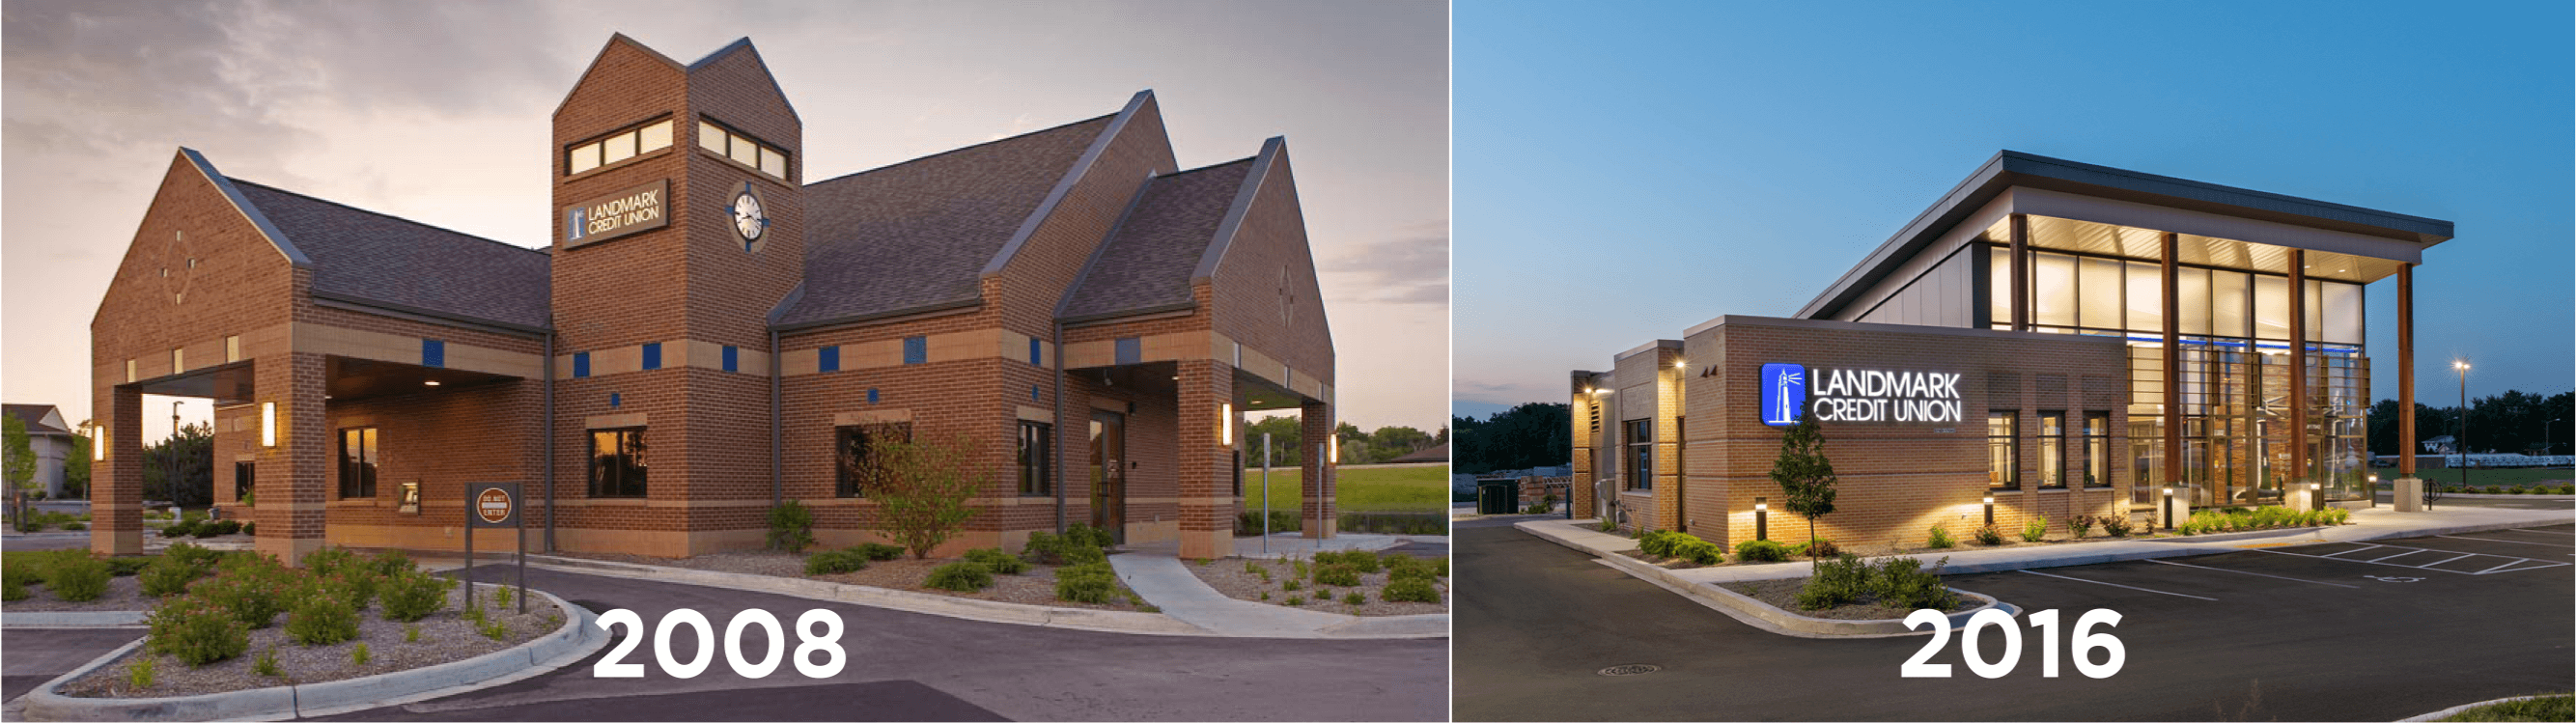 Before and after of prototype design for Landmark Credit Union